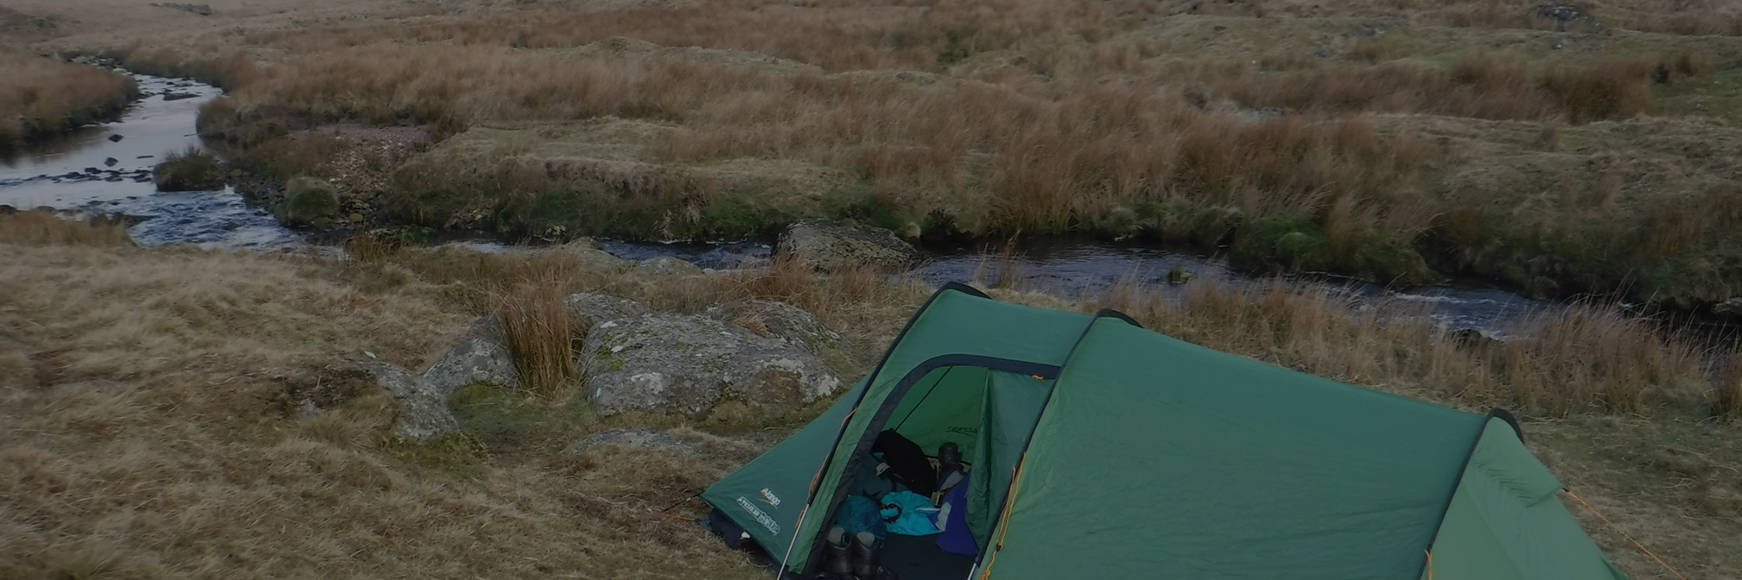 Wild Camping: Why it'll make you smile banner image